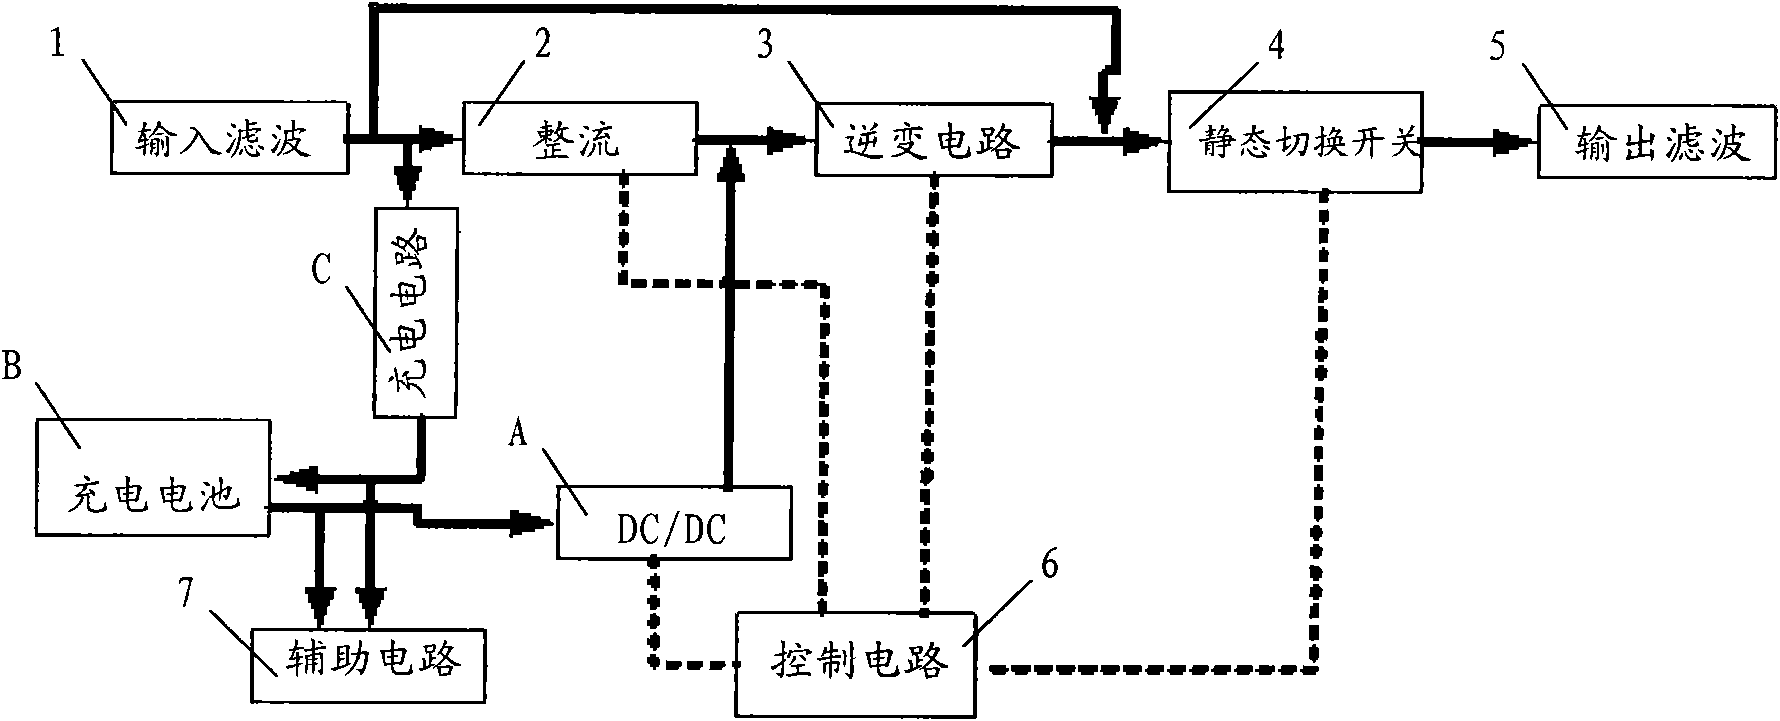 UPS (Uninterrupted Power Supply) power supply control circuit and UPS power supply